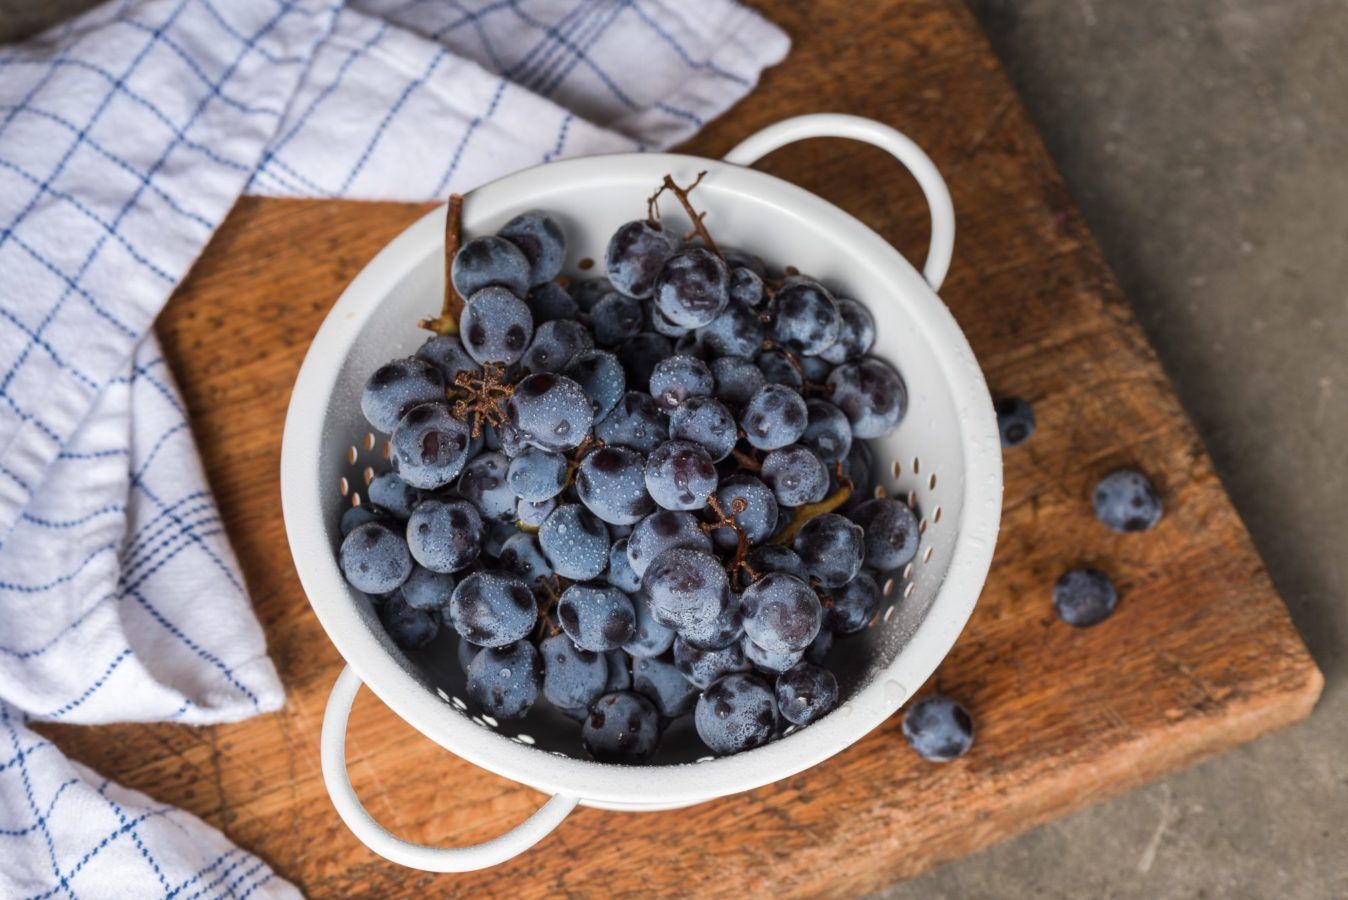 Do you Like grapes? New research suggests the fruit may reduce the risk of heart attack